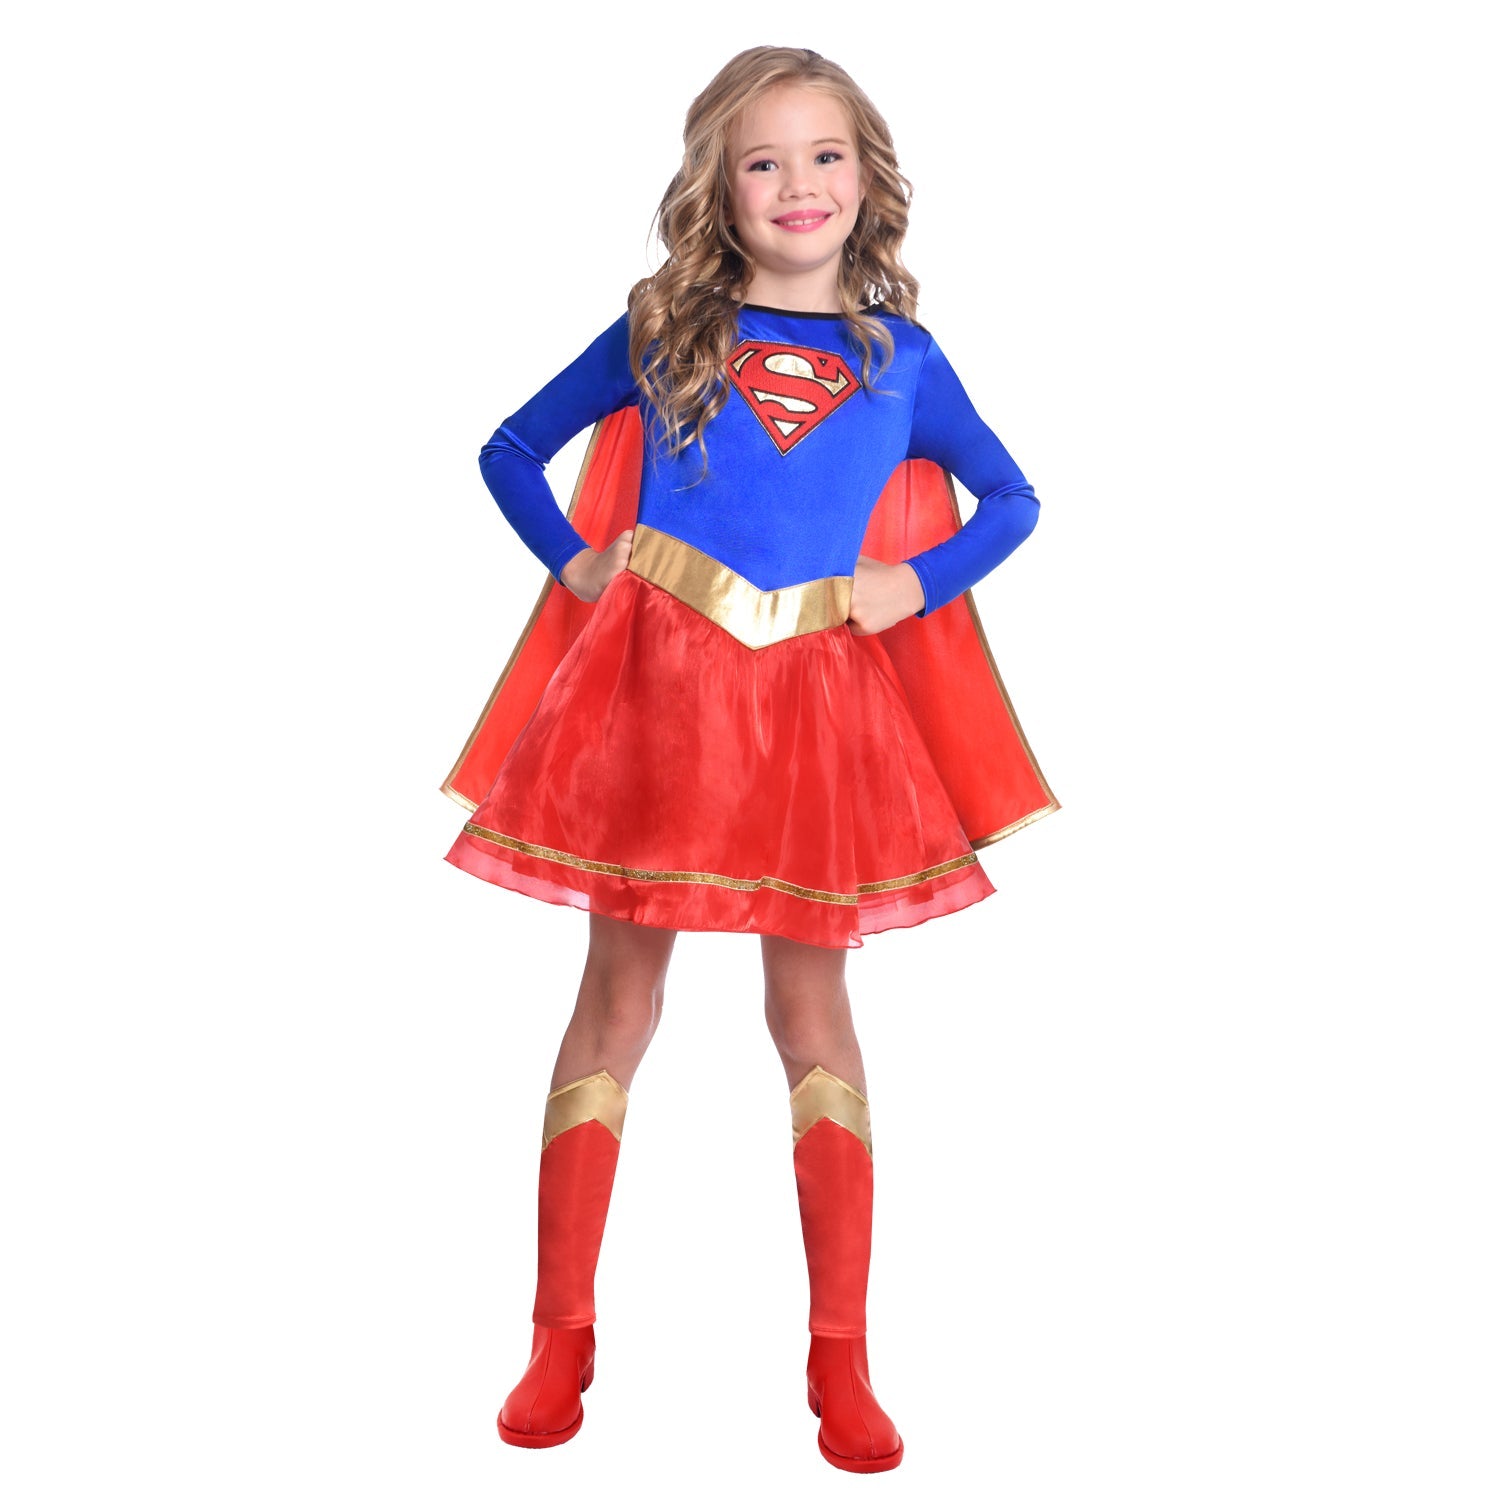 Supergirl Classic Costume includes dress, detachable cape and leg covers